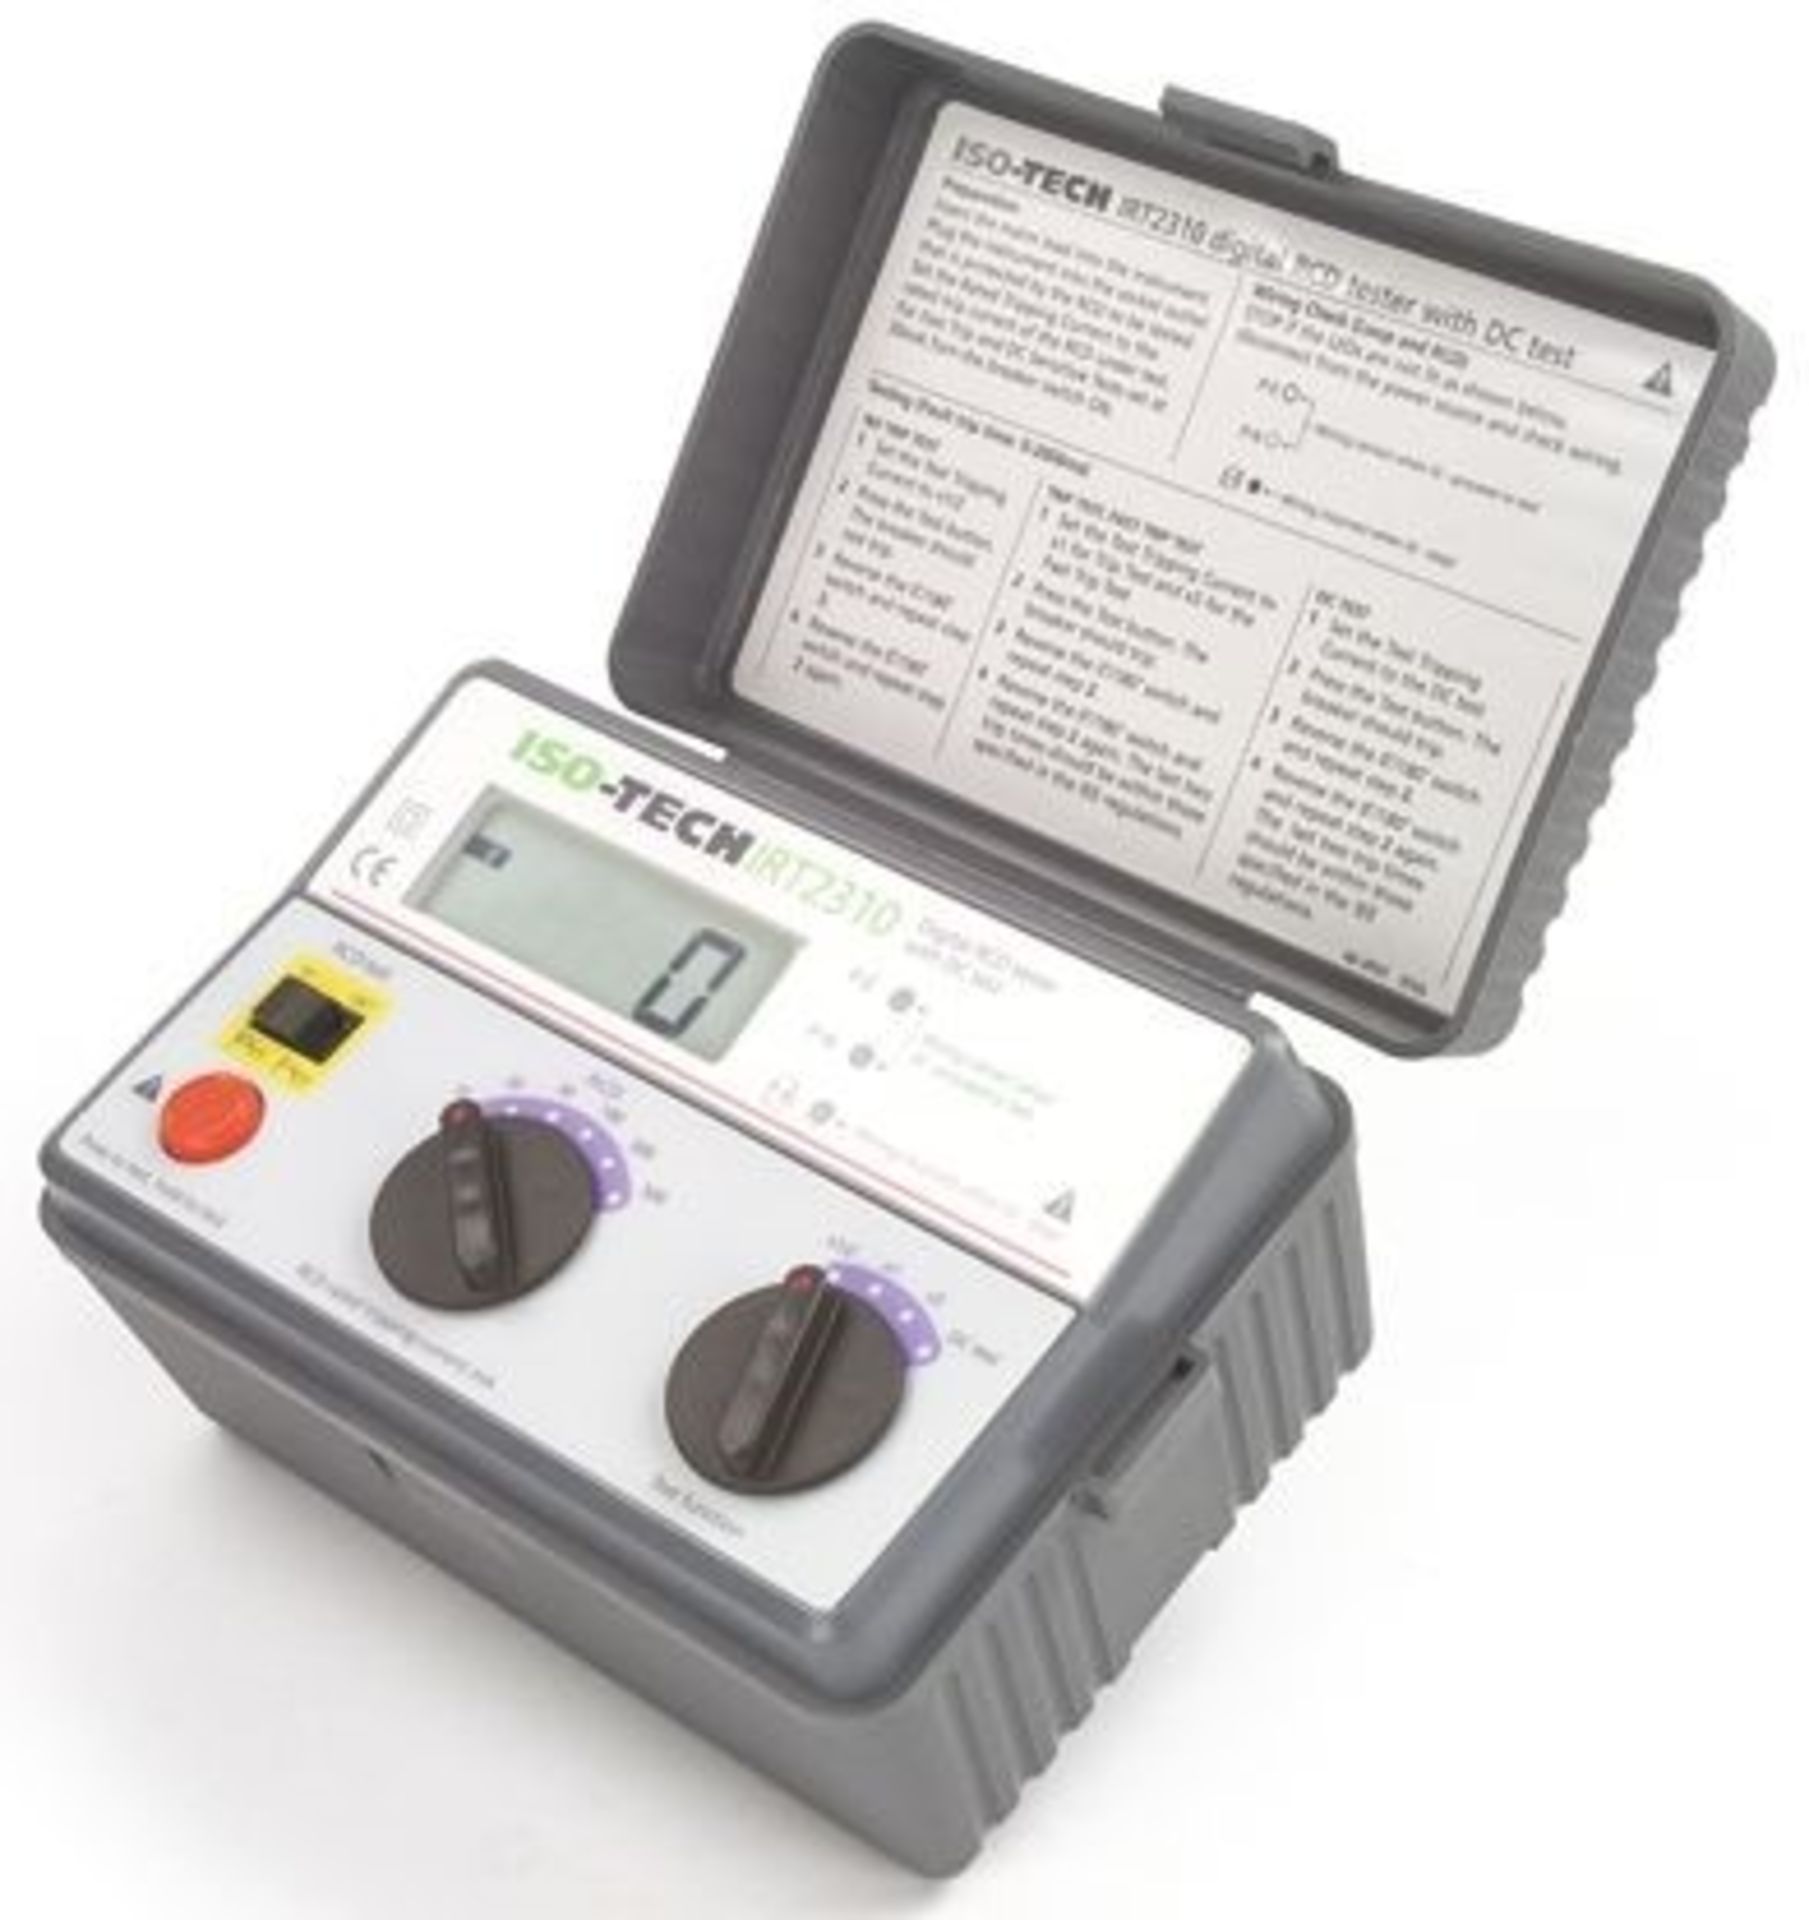 IRT 2310 RCD Tester with DC Test 500mA DC CAT III 300 V